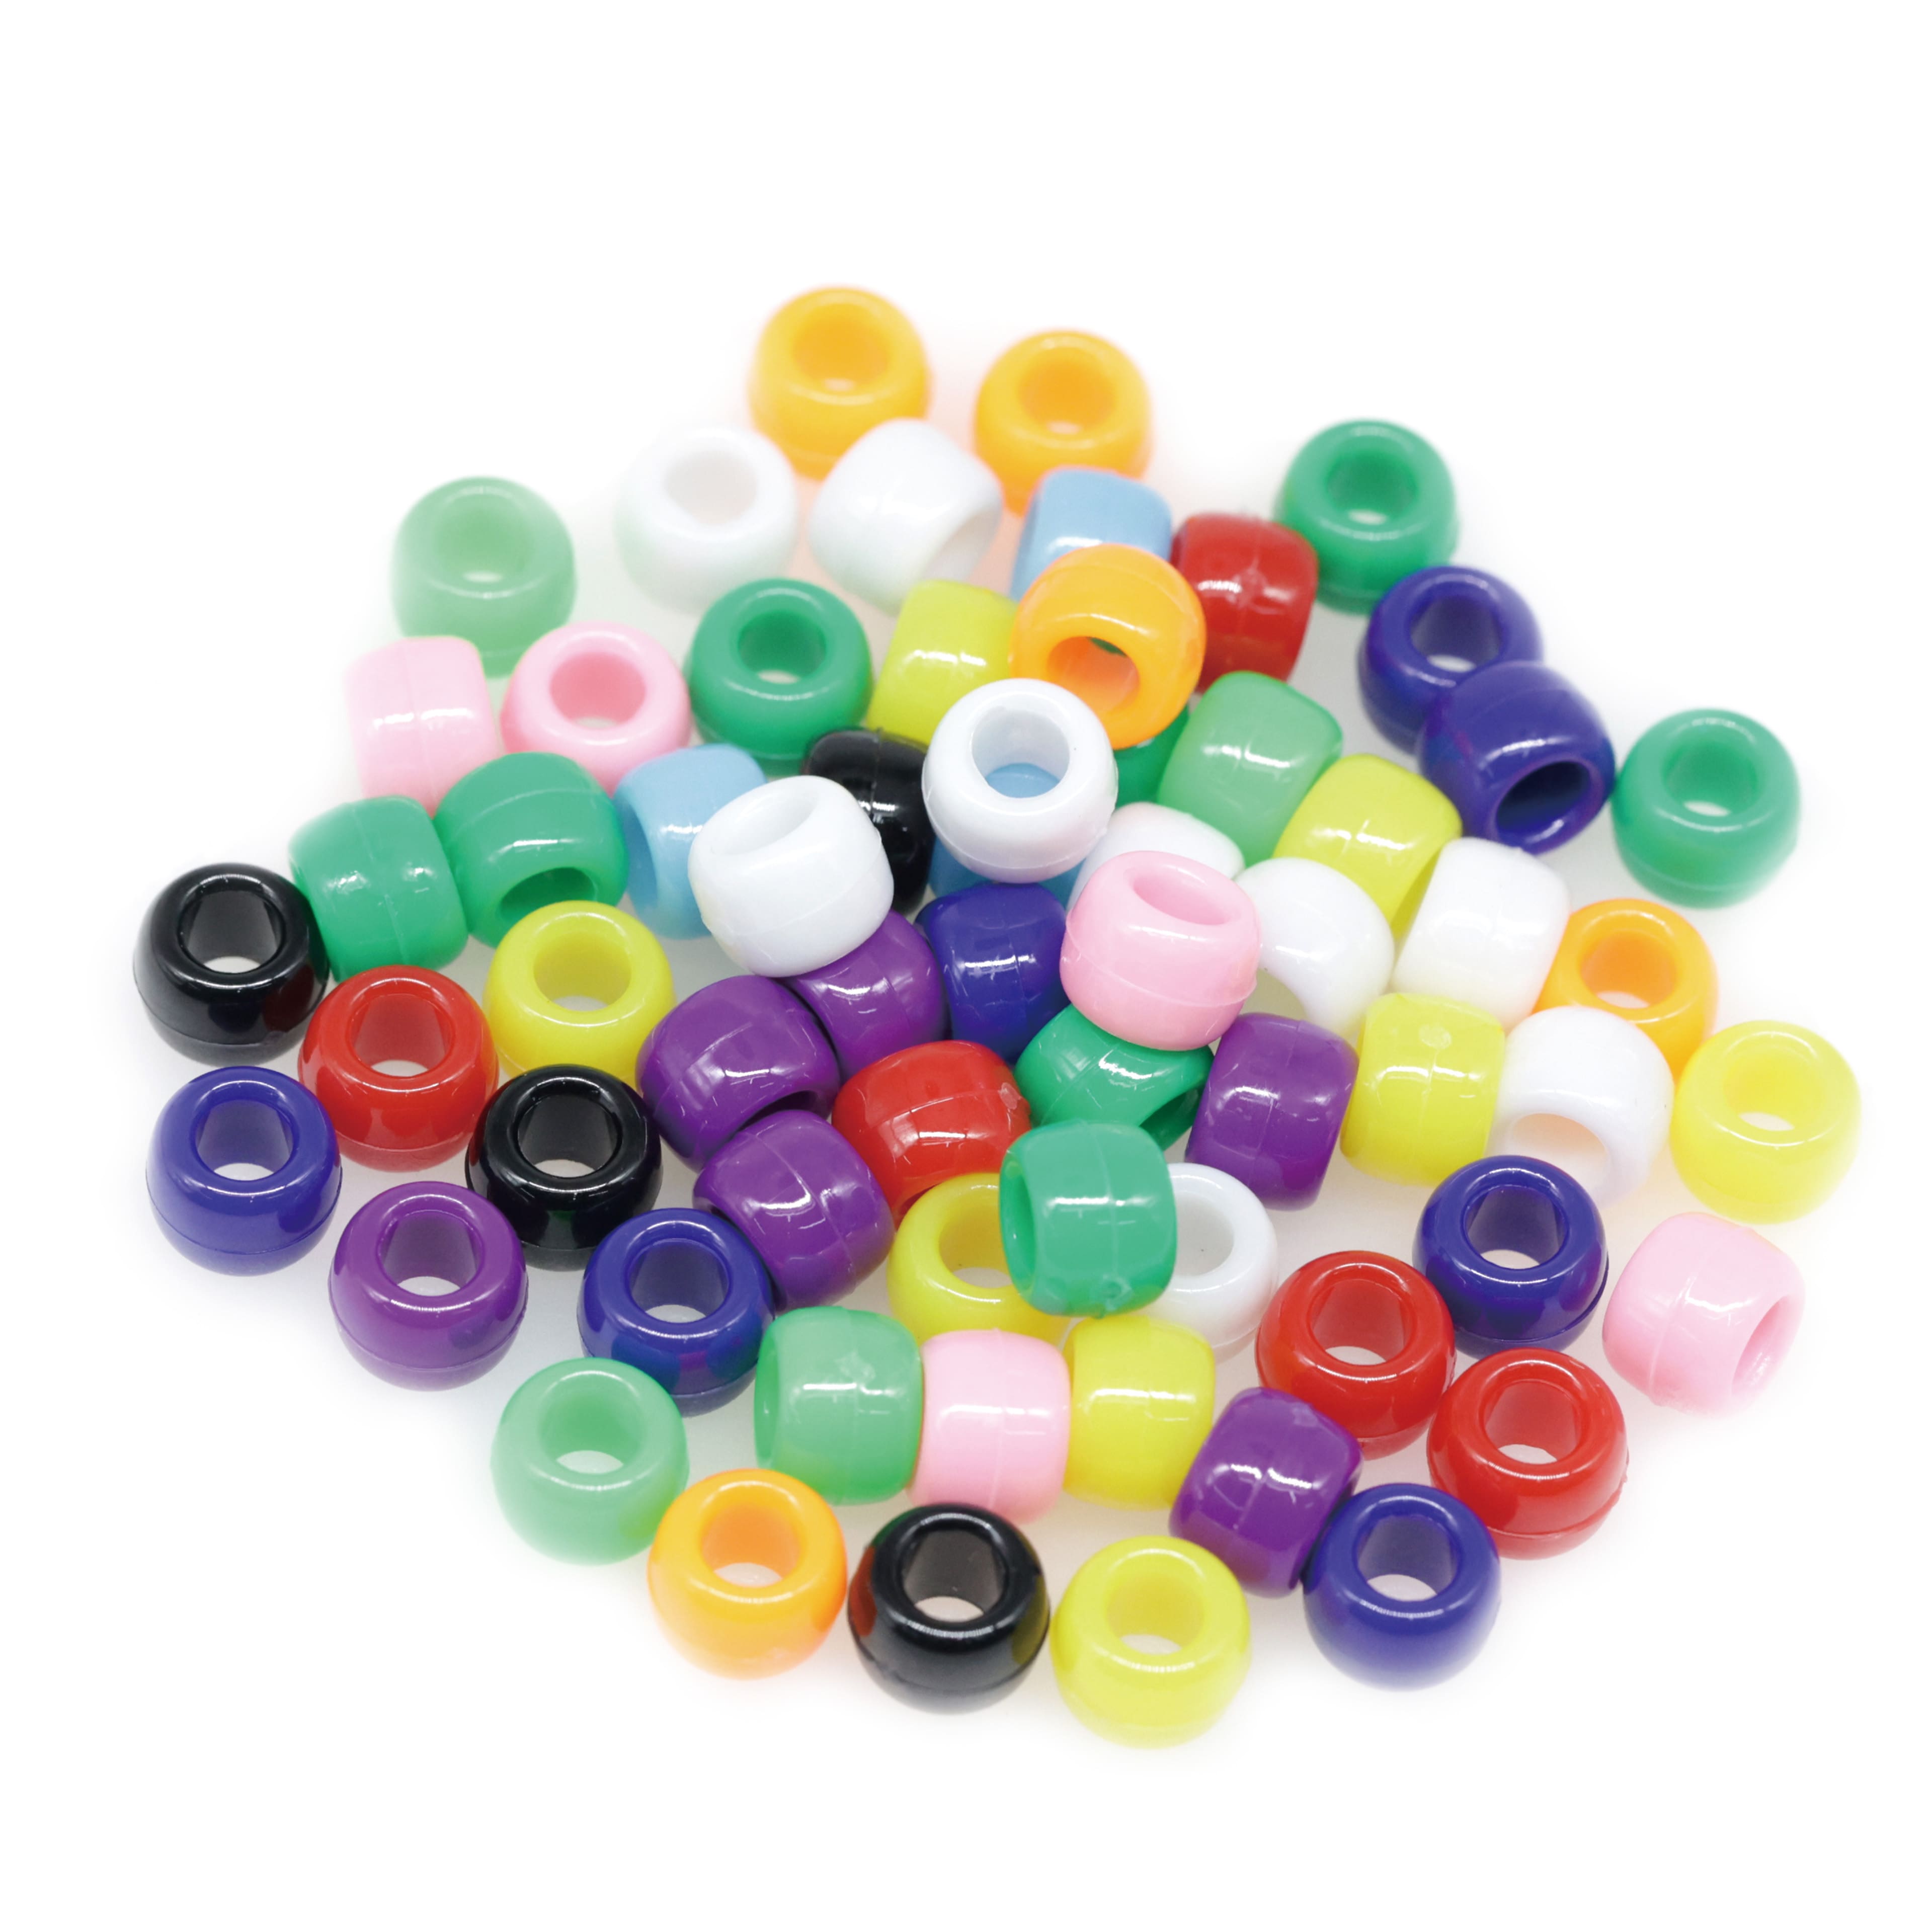 12 Packs: 580 Ct. (6,960 Total) Opaque Pony Beads by Creatology, 6mm x 9mm, Girl's, Size: 6 mm x 9 mm, Purple